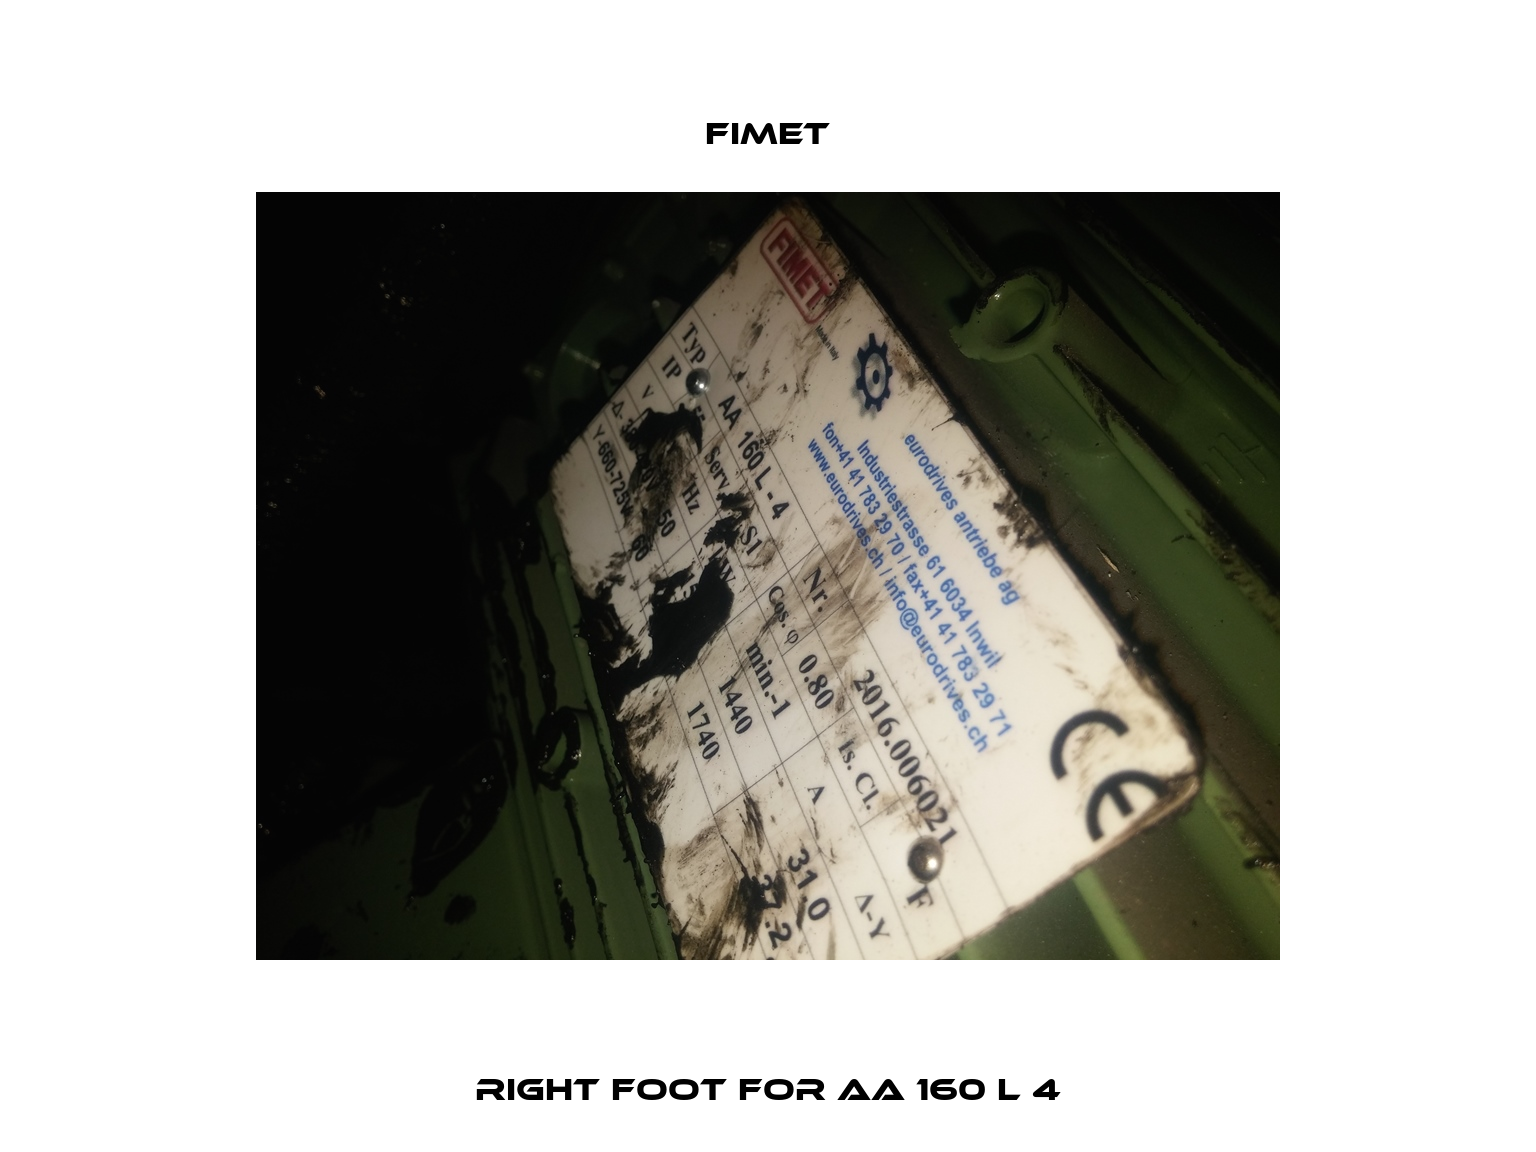 right foot for AA 160 L 4 Fimet